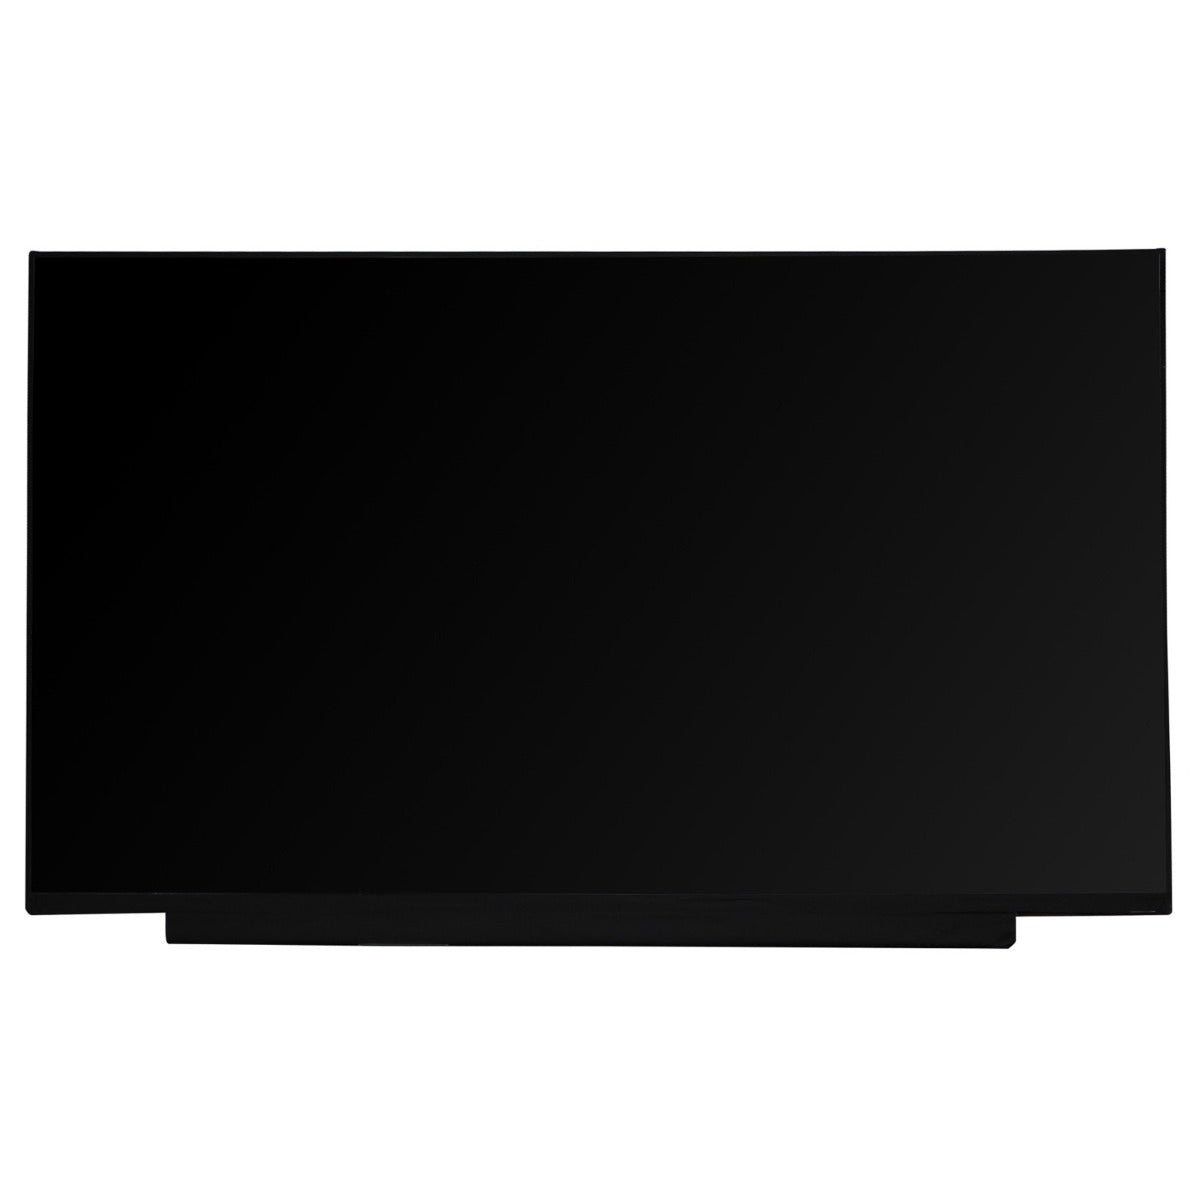 New Replacement For NE173QHM-NY2 QHD 2560x1440 17.3" 165Hz 40 pin LED Screen Compatible With ASUS ROG G733QM